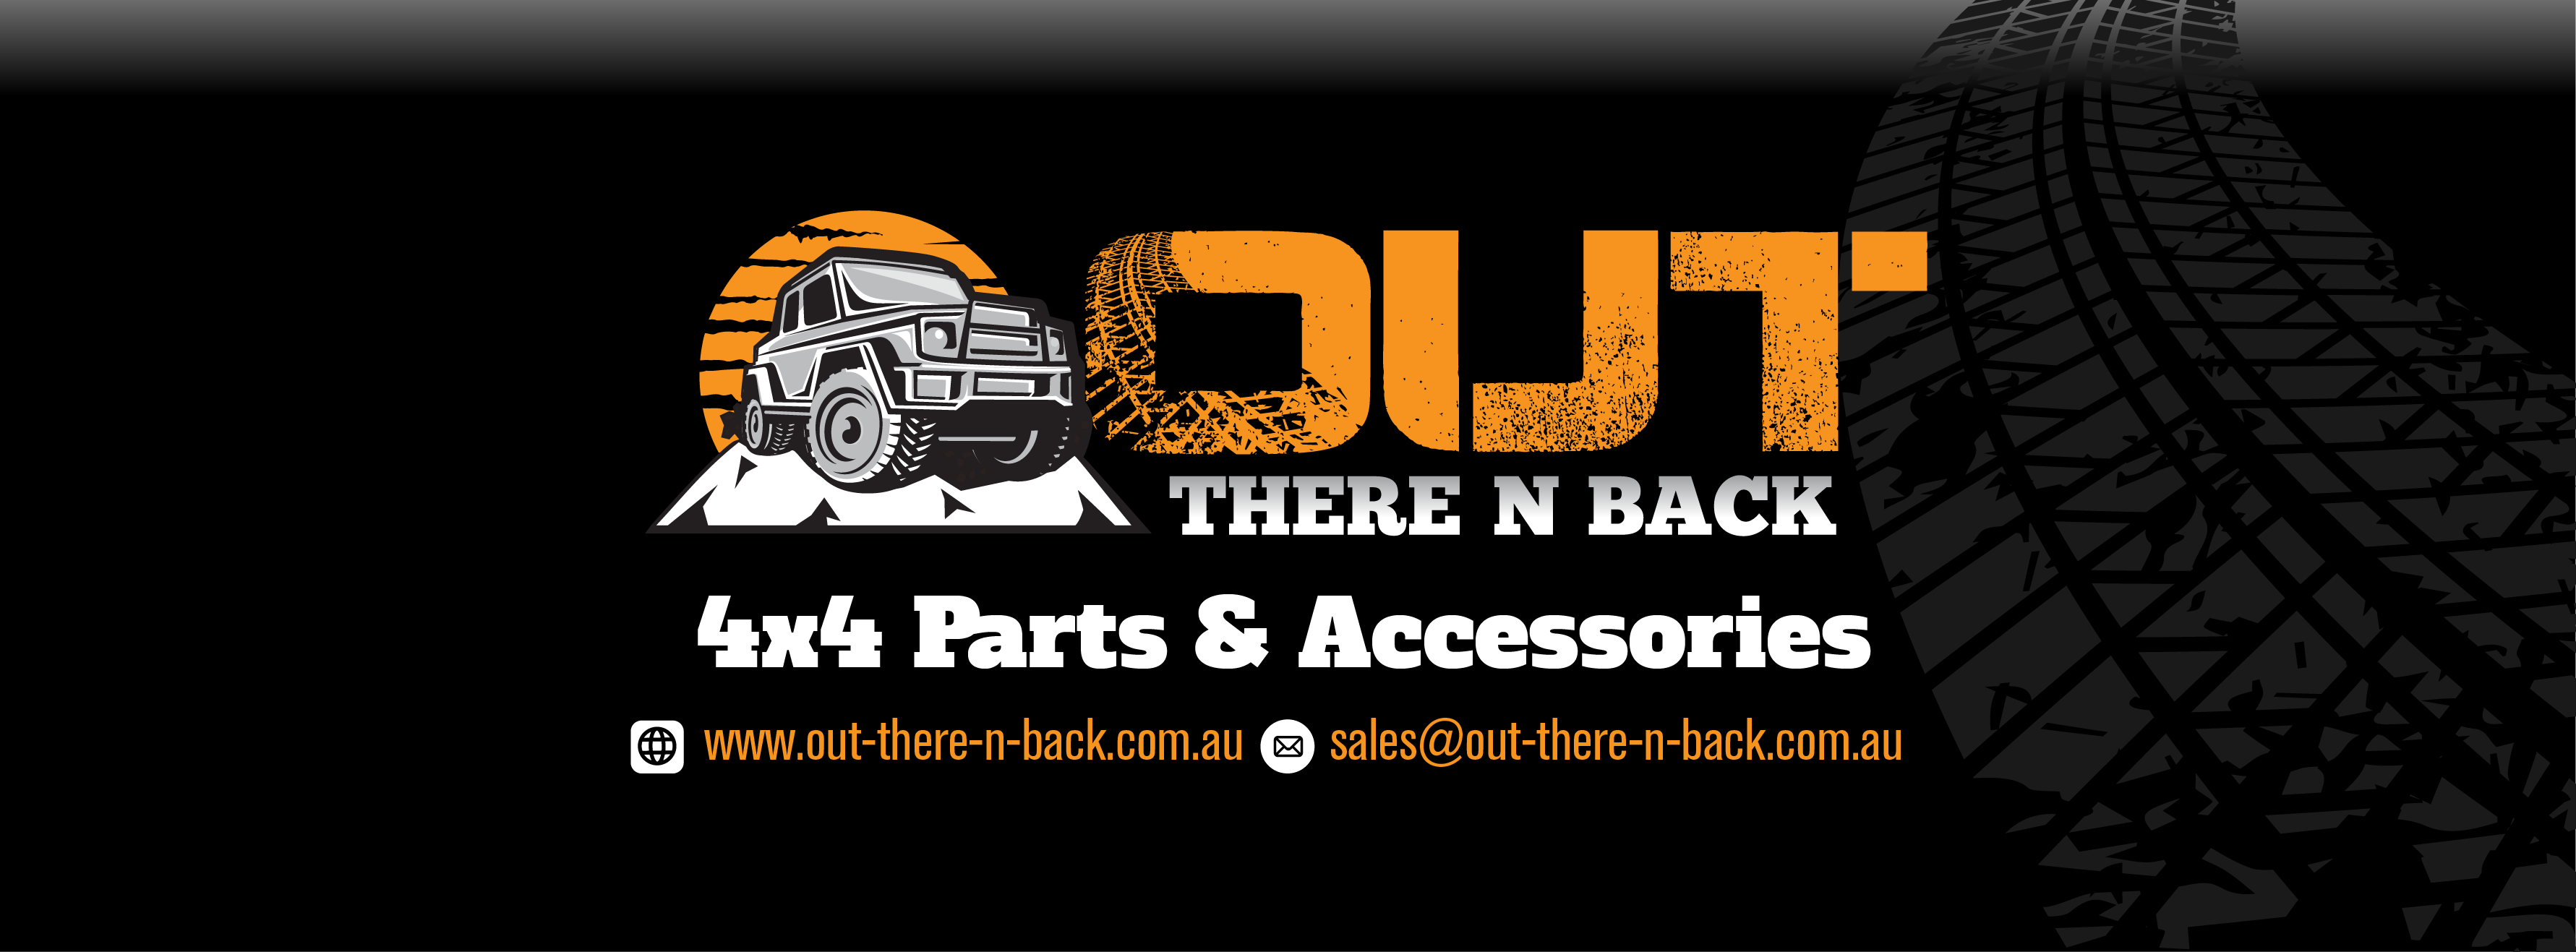 Out There n Back 4×4 Parts & Accessories